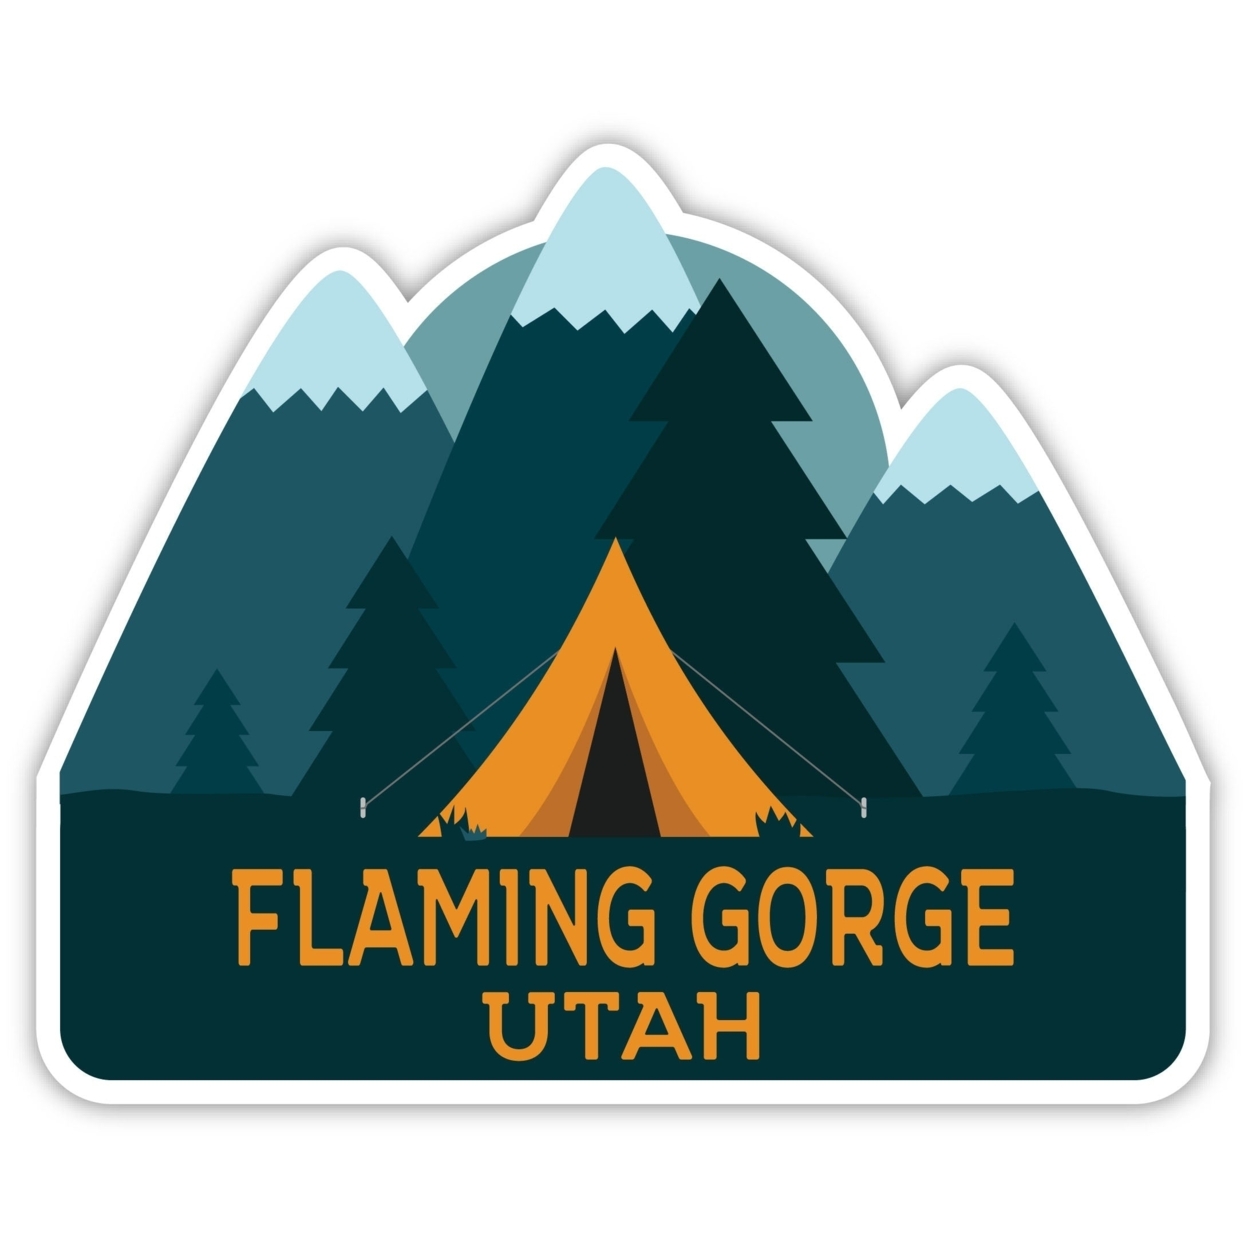 Flaming Gorge Utah Souvenir Decorative Stickers (Choose Theme And Size) - 4-Pack, 8-Inch, Adventures Awaits